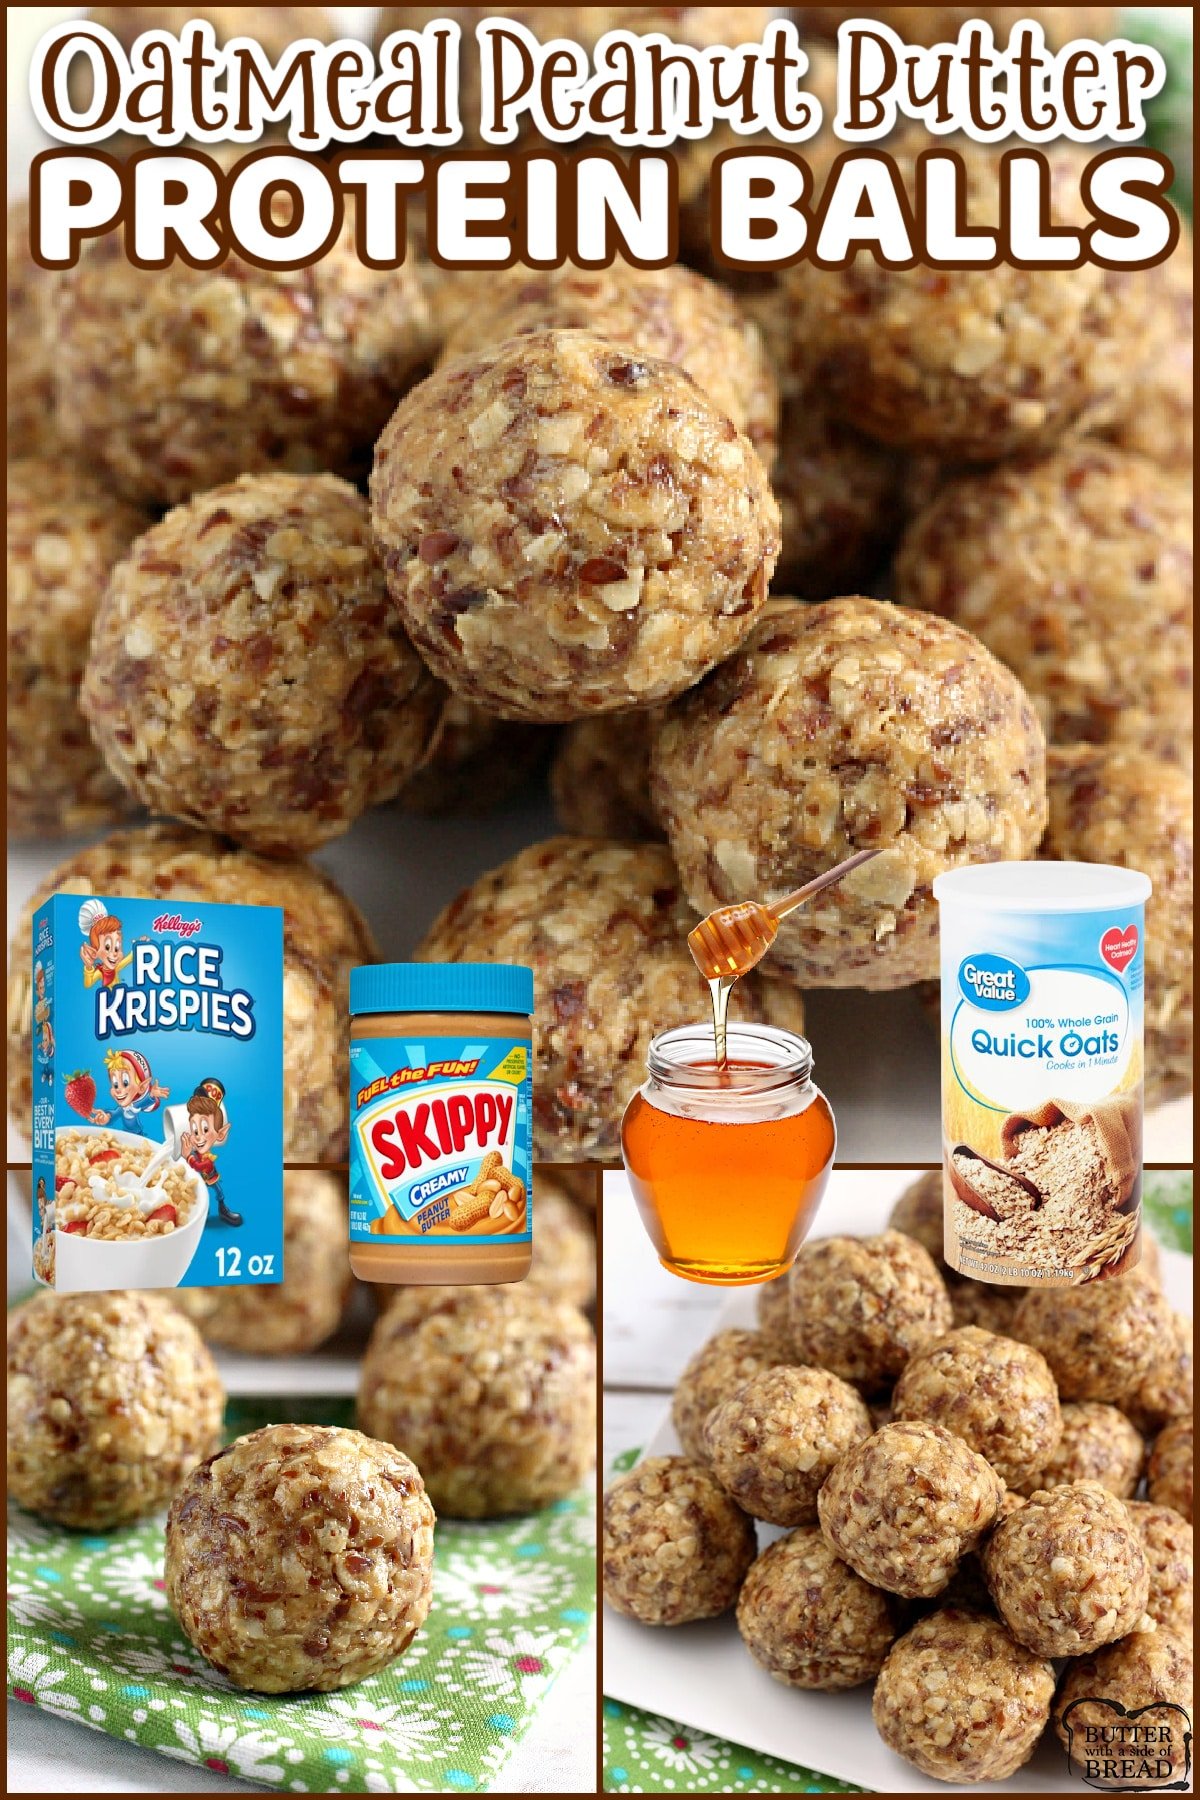 Oatmeal Peanut Butter Protein Balls are made with oats, peanut butter, honey, flaxseed, Rice Krispies, coconut oil and vanilla. These are healthy, filling and the best protein ball recipe that I've ever tried!